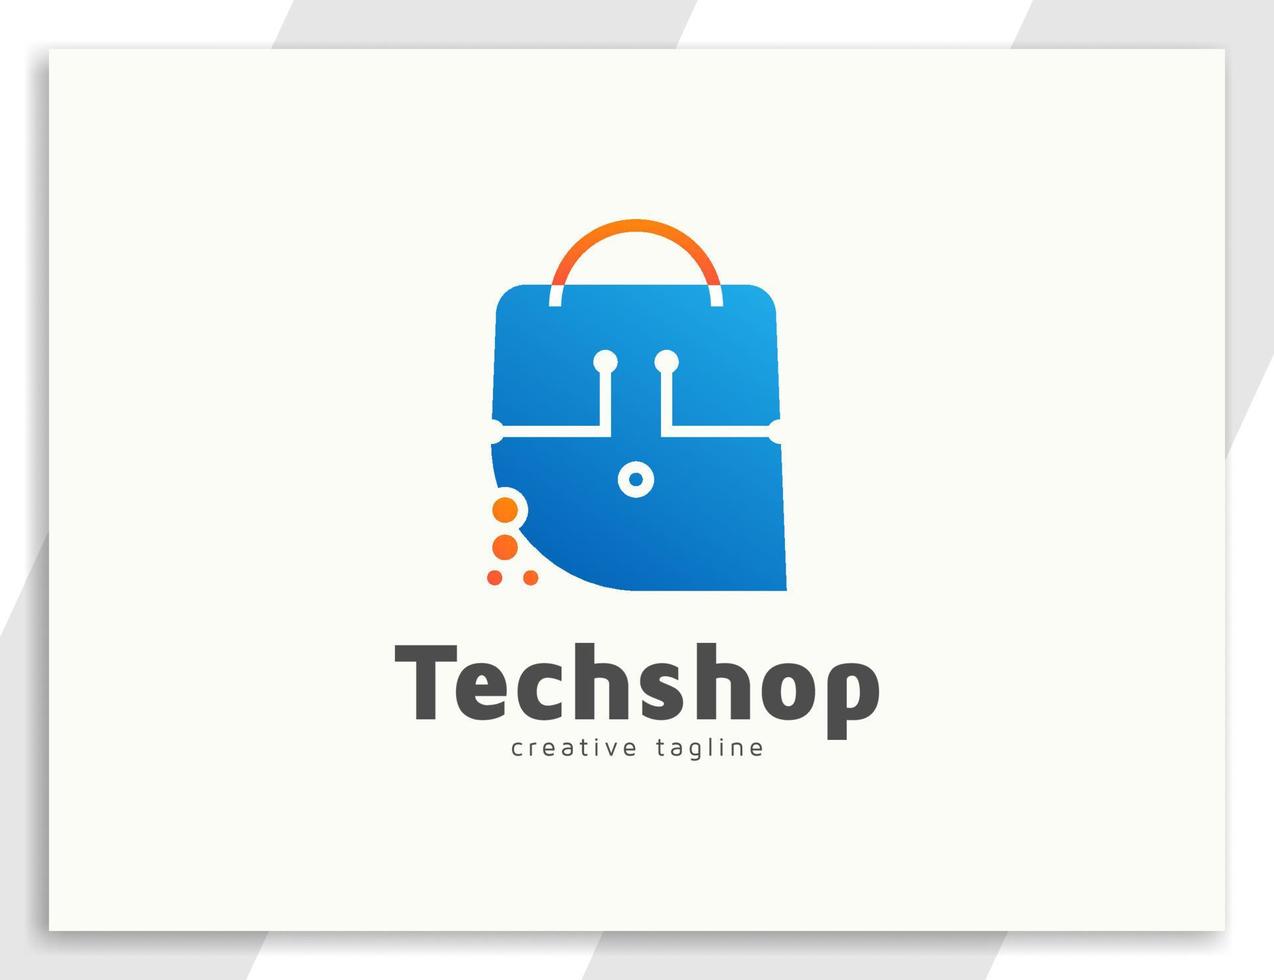 Online shop logo with technology concept vector